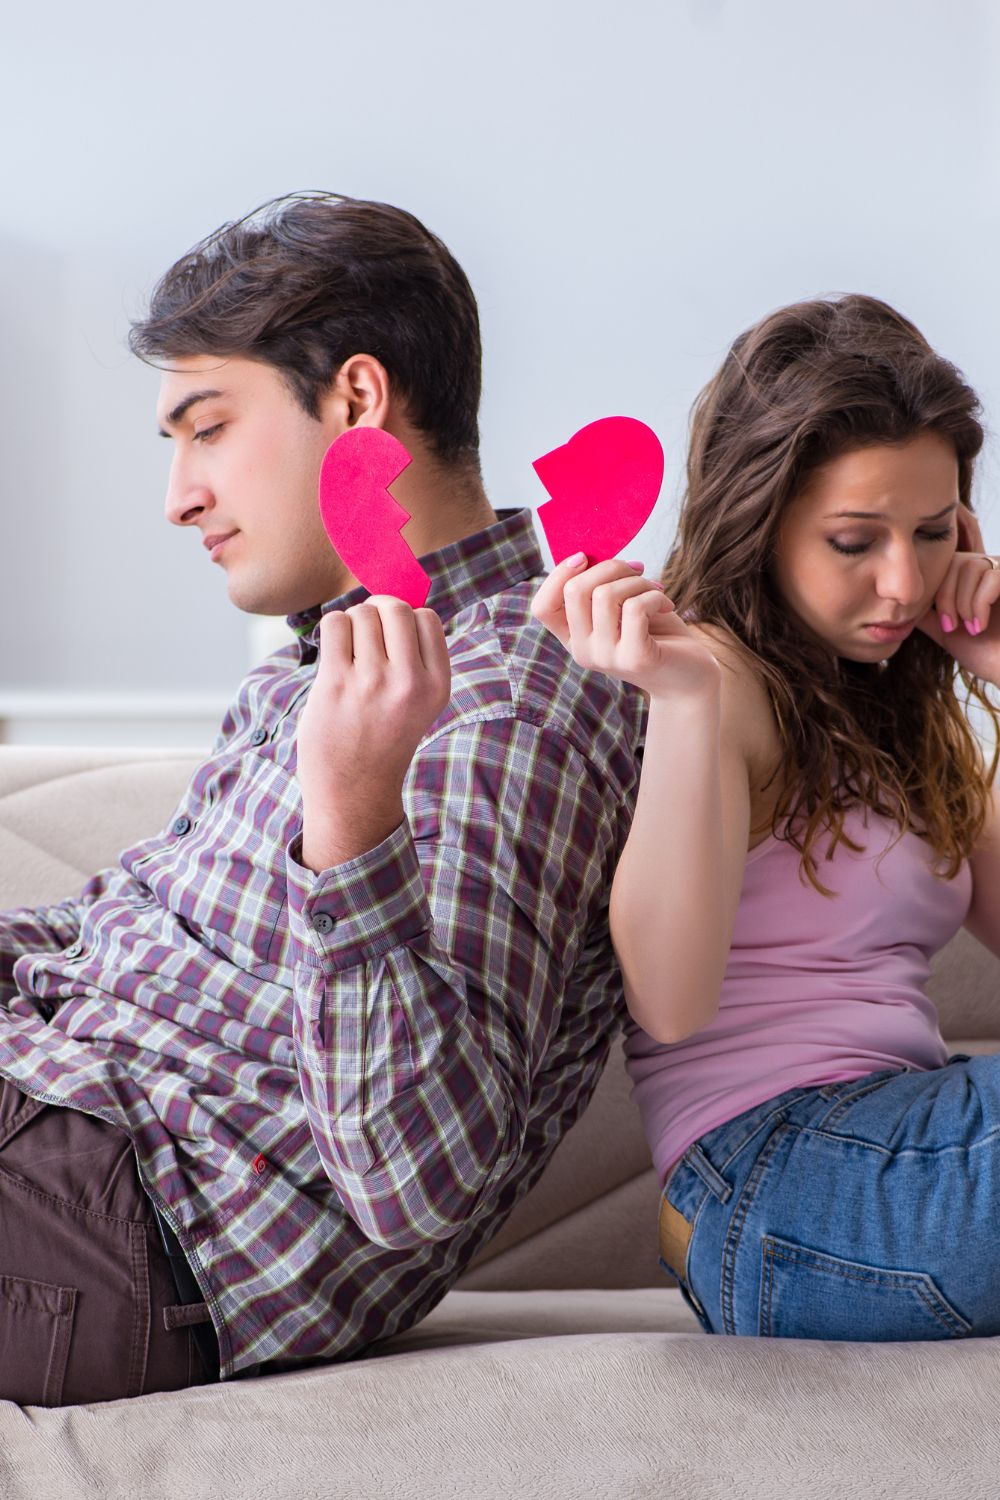 Why Am I Not Attracted To Anyone After My Ex? The 5 Weird Reasons ...